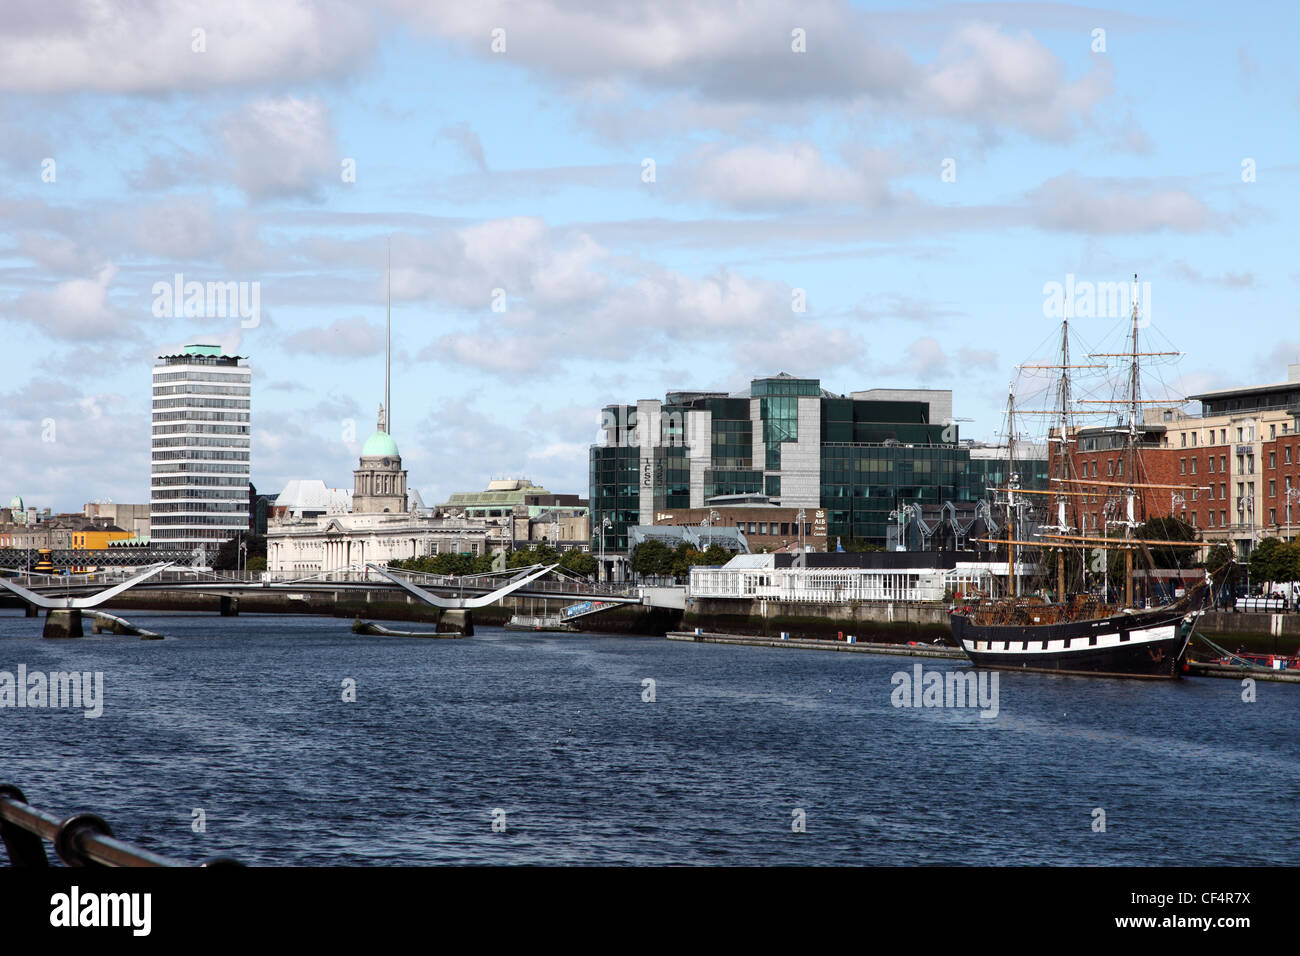 View along the River Liffey towards Custom House Quay from the South Quays featuring Liberty Hall, Customs House, the chq Buildi Stock Photo